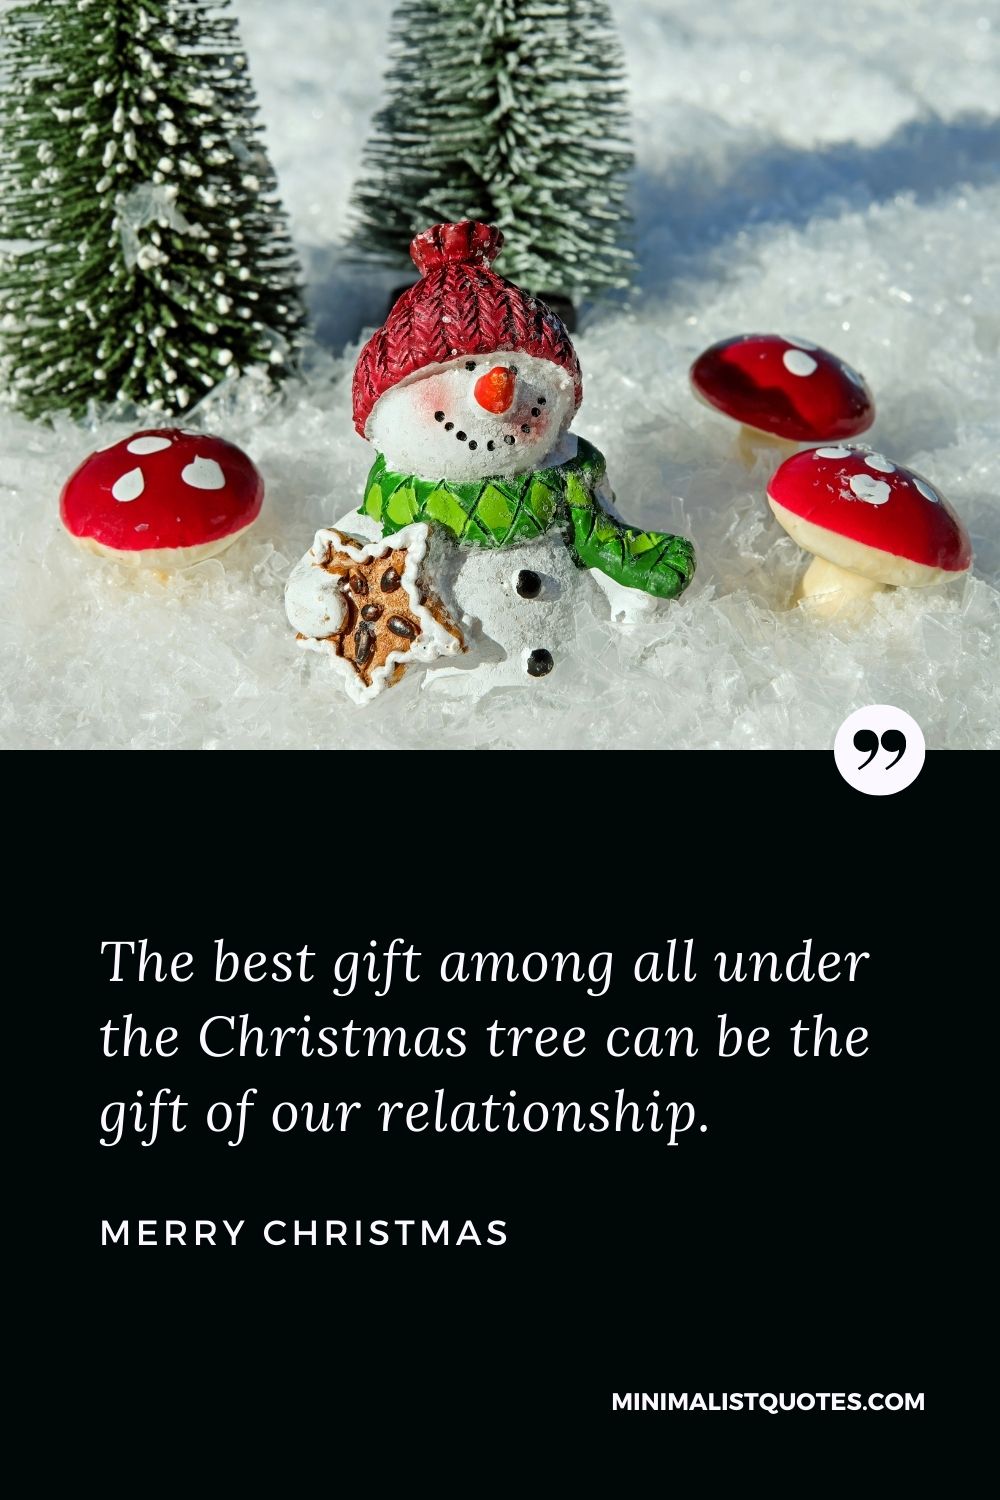 Merry Christmas Wish - The best gift among all under the Christmas tree can be the gift of our relationship.